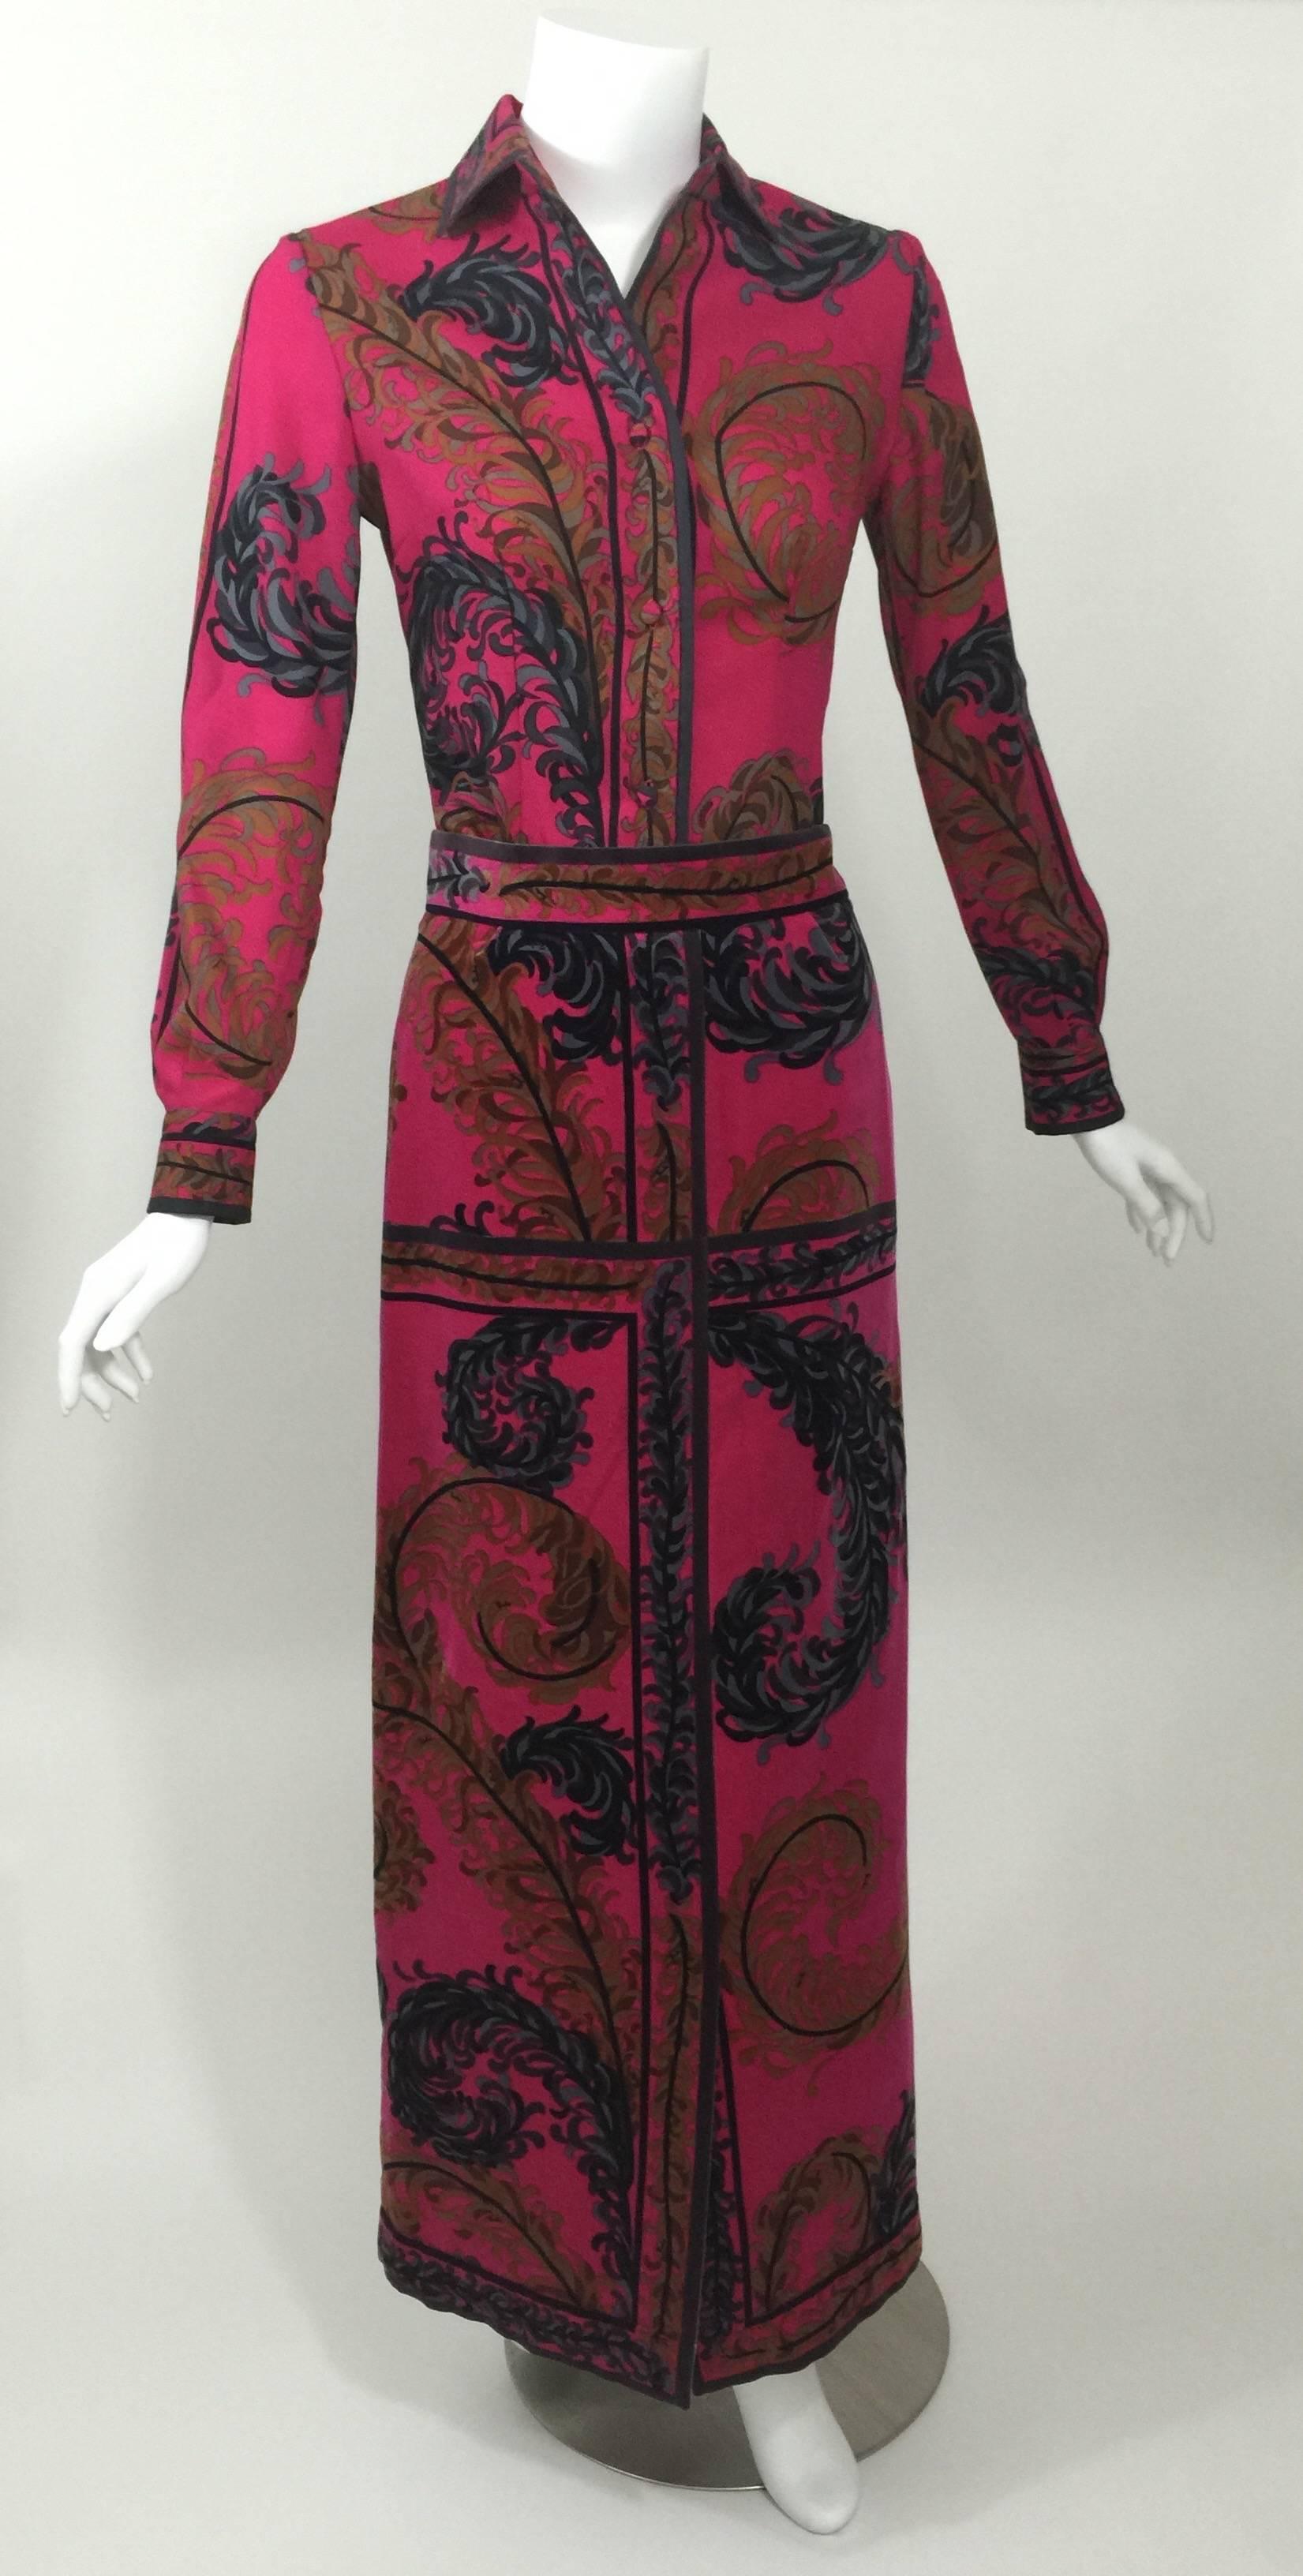 A Fabulous feather printed Pucci Outfit. Loving the color combination. of  the bright Fuschia background with the print in blues, black and gold.
The Blouse is a lightweight wool, with covered buttons,and side slits. The skirt is cotton velvet and